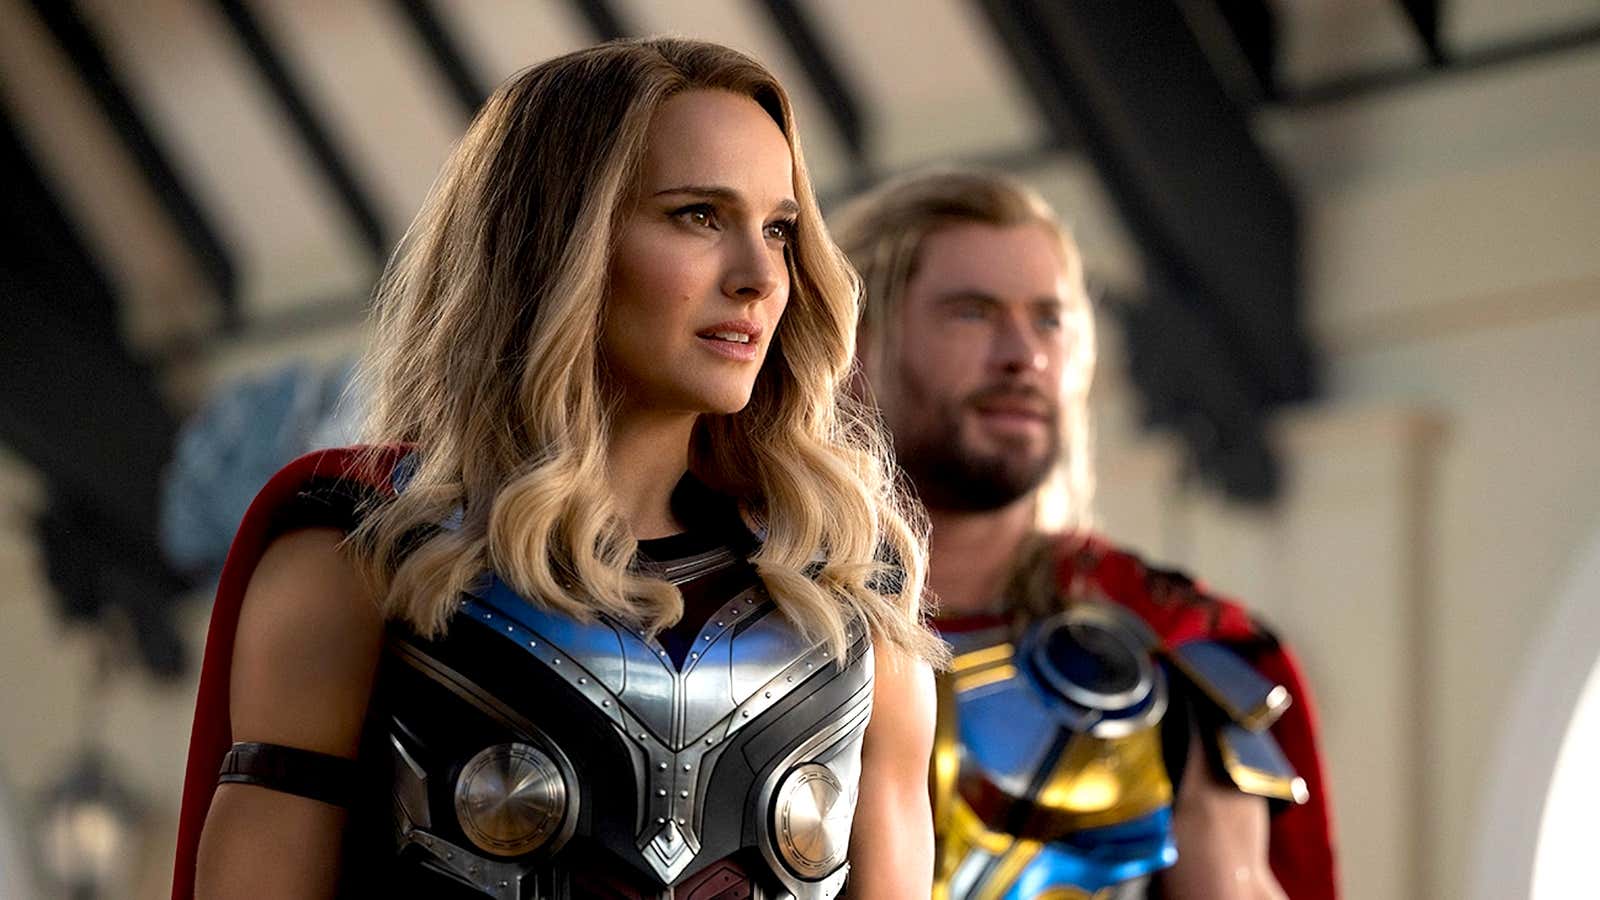 Box office: 'Thor: Love and Thunder' has $143 million domestic opening